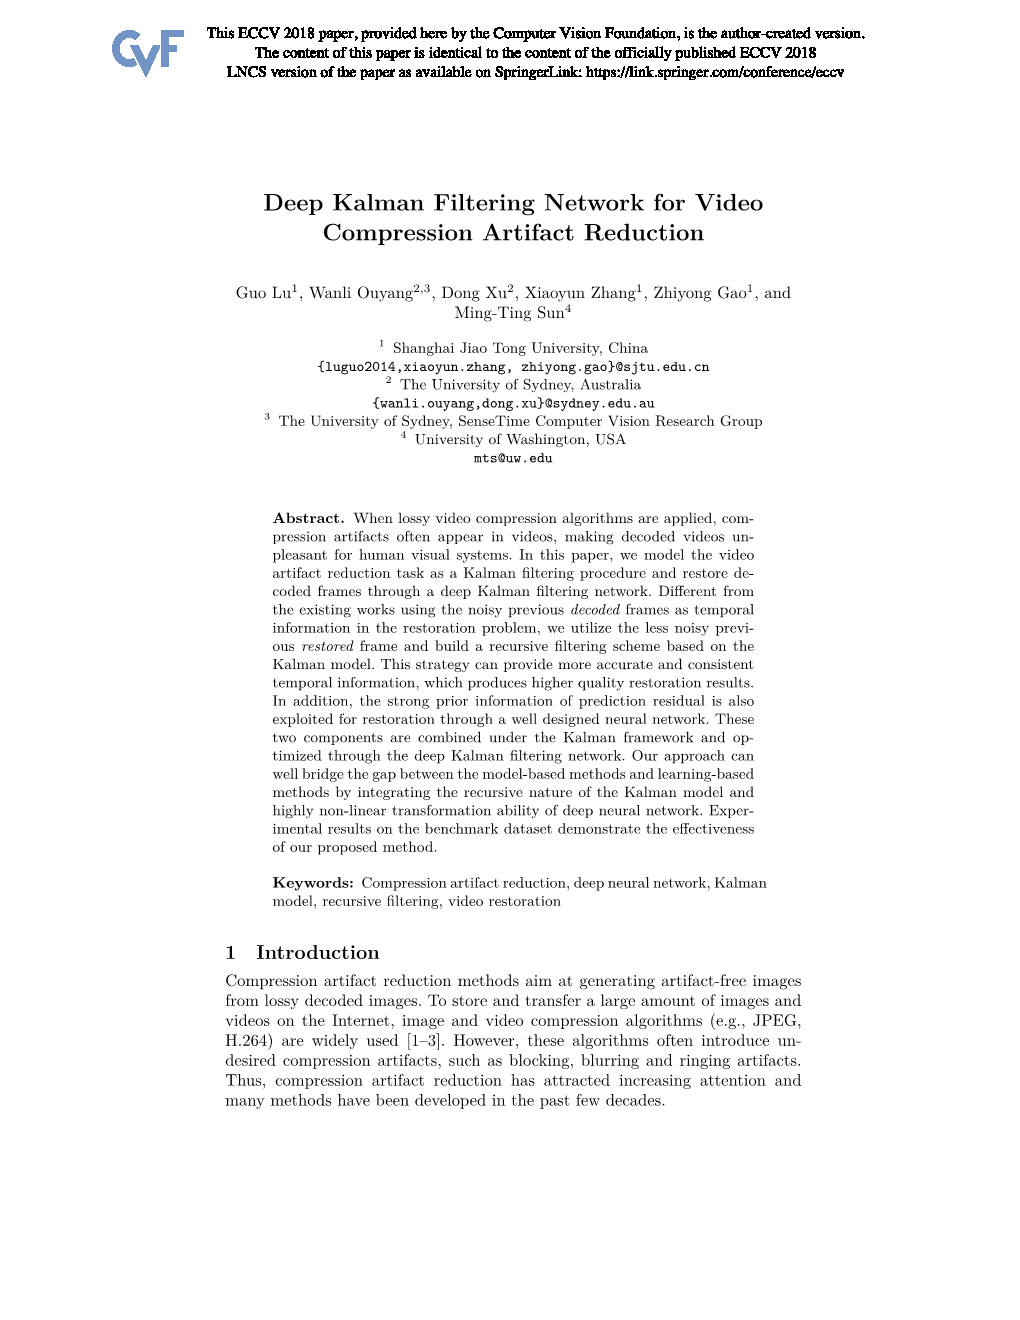 Deep Kalman Filtering Network for Video Compression Artifact Reduction